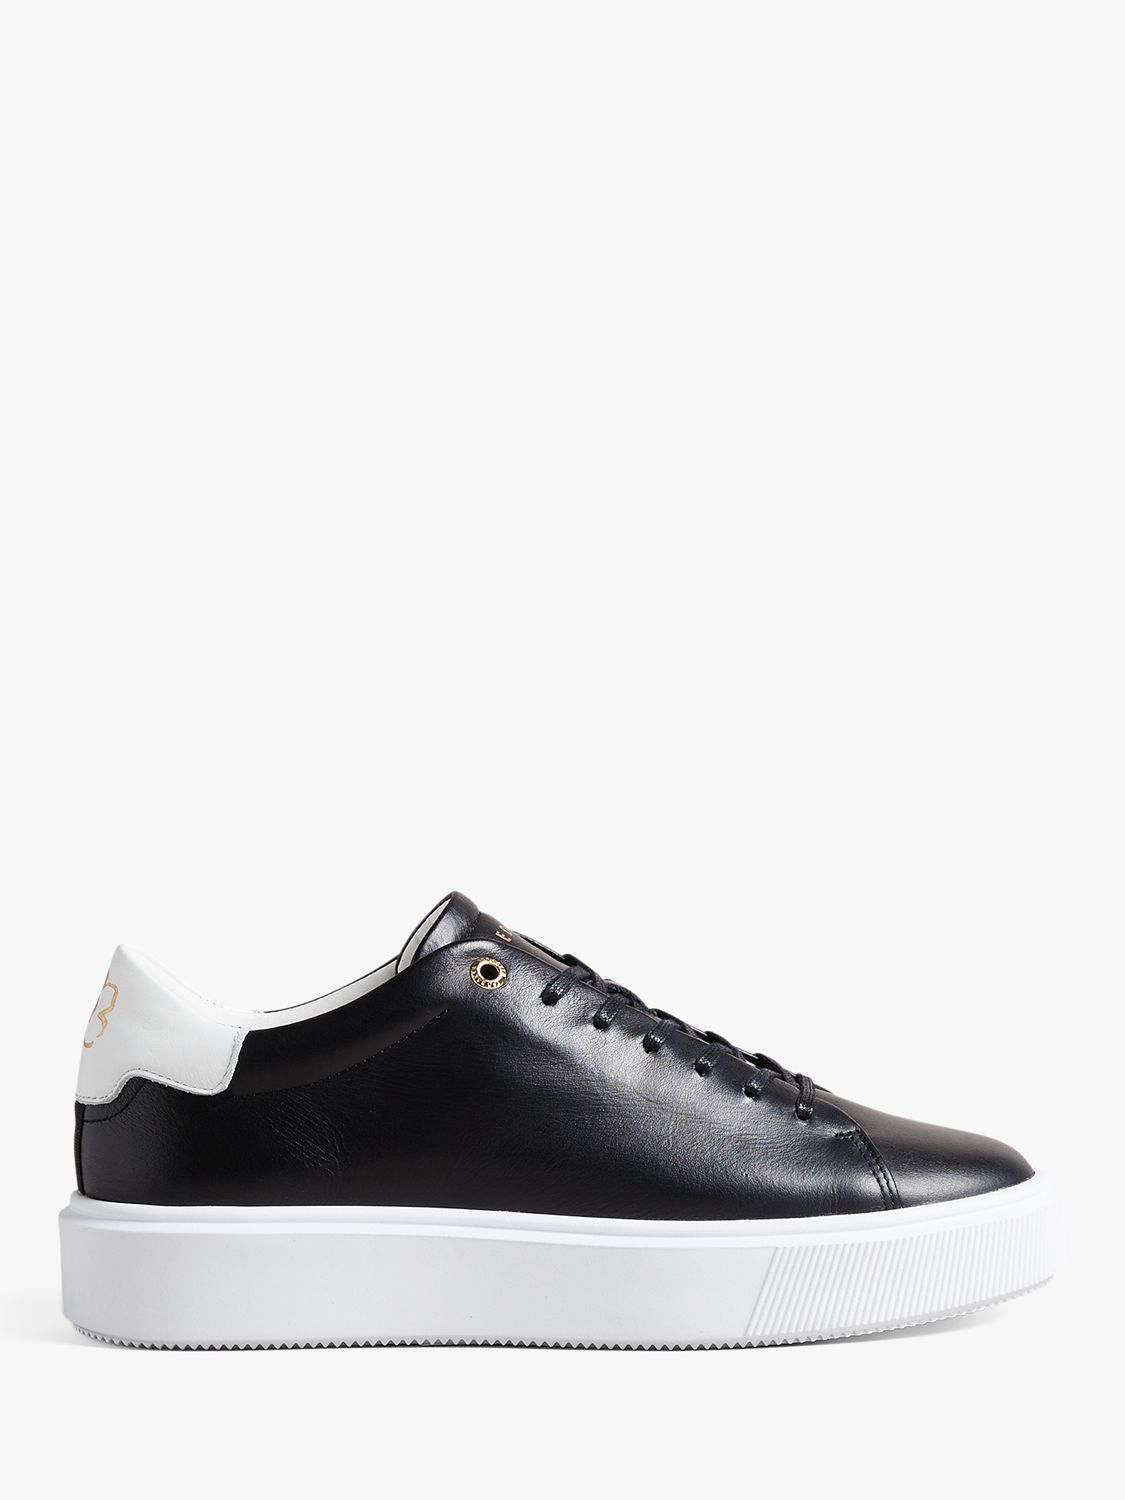 Ted Baker Lornea Leather Chunky Trainers, Black at John Lewis & Partners